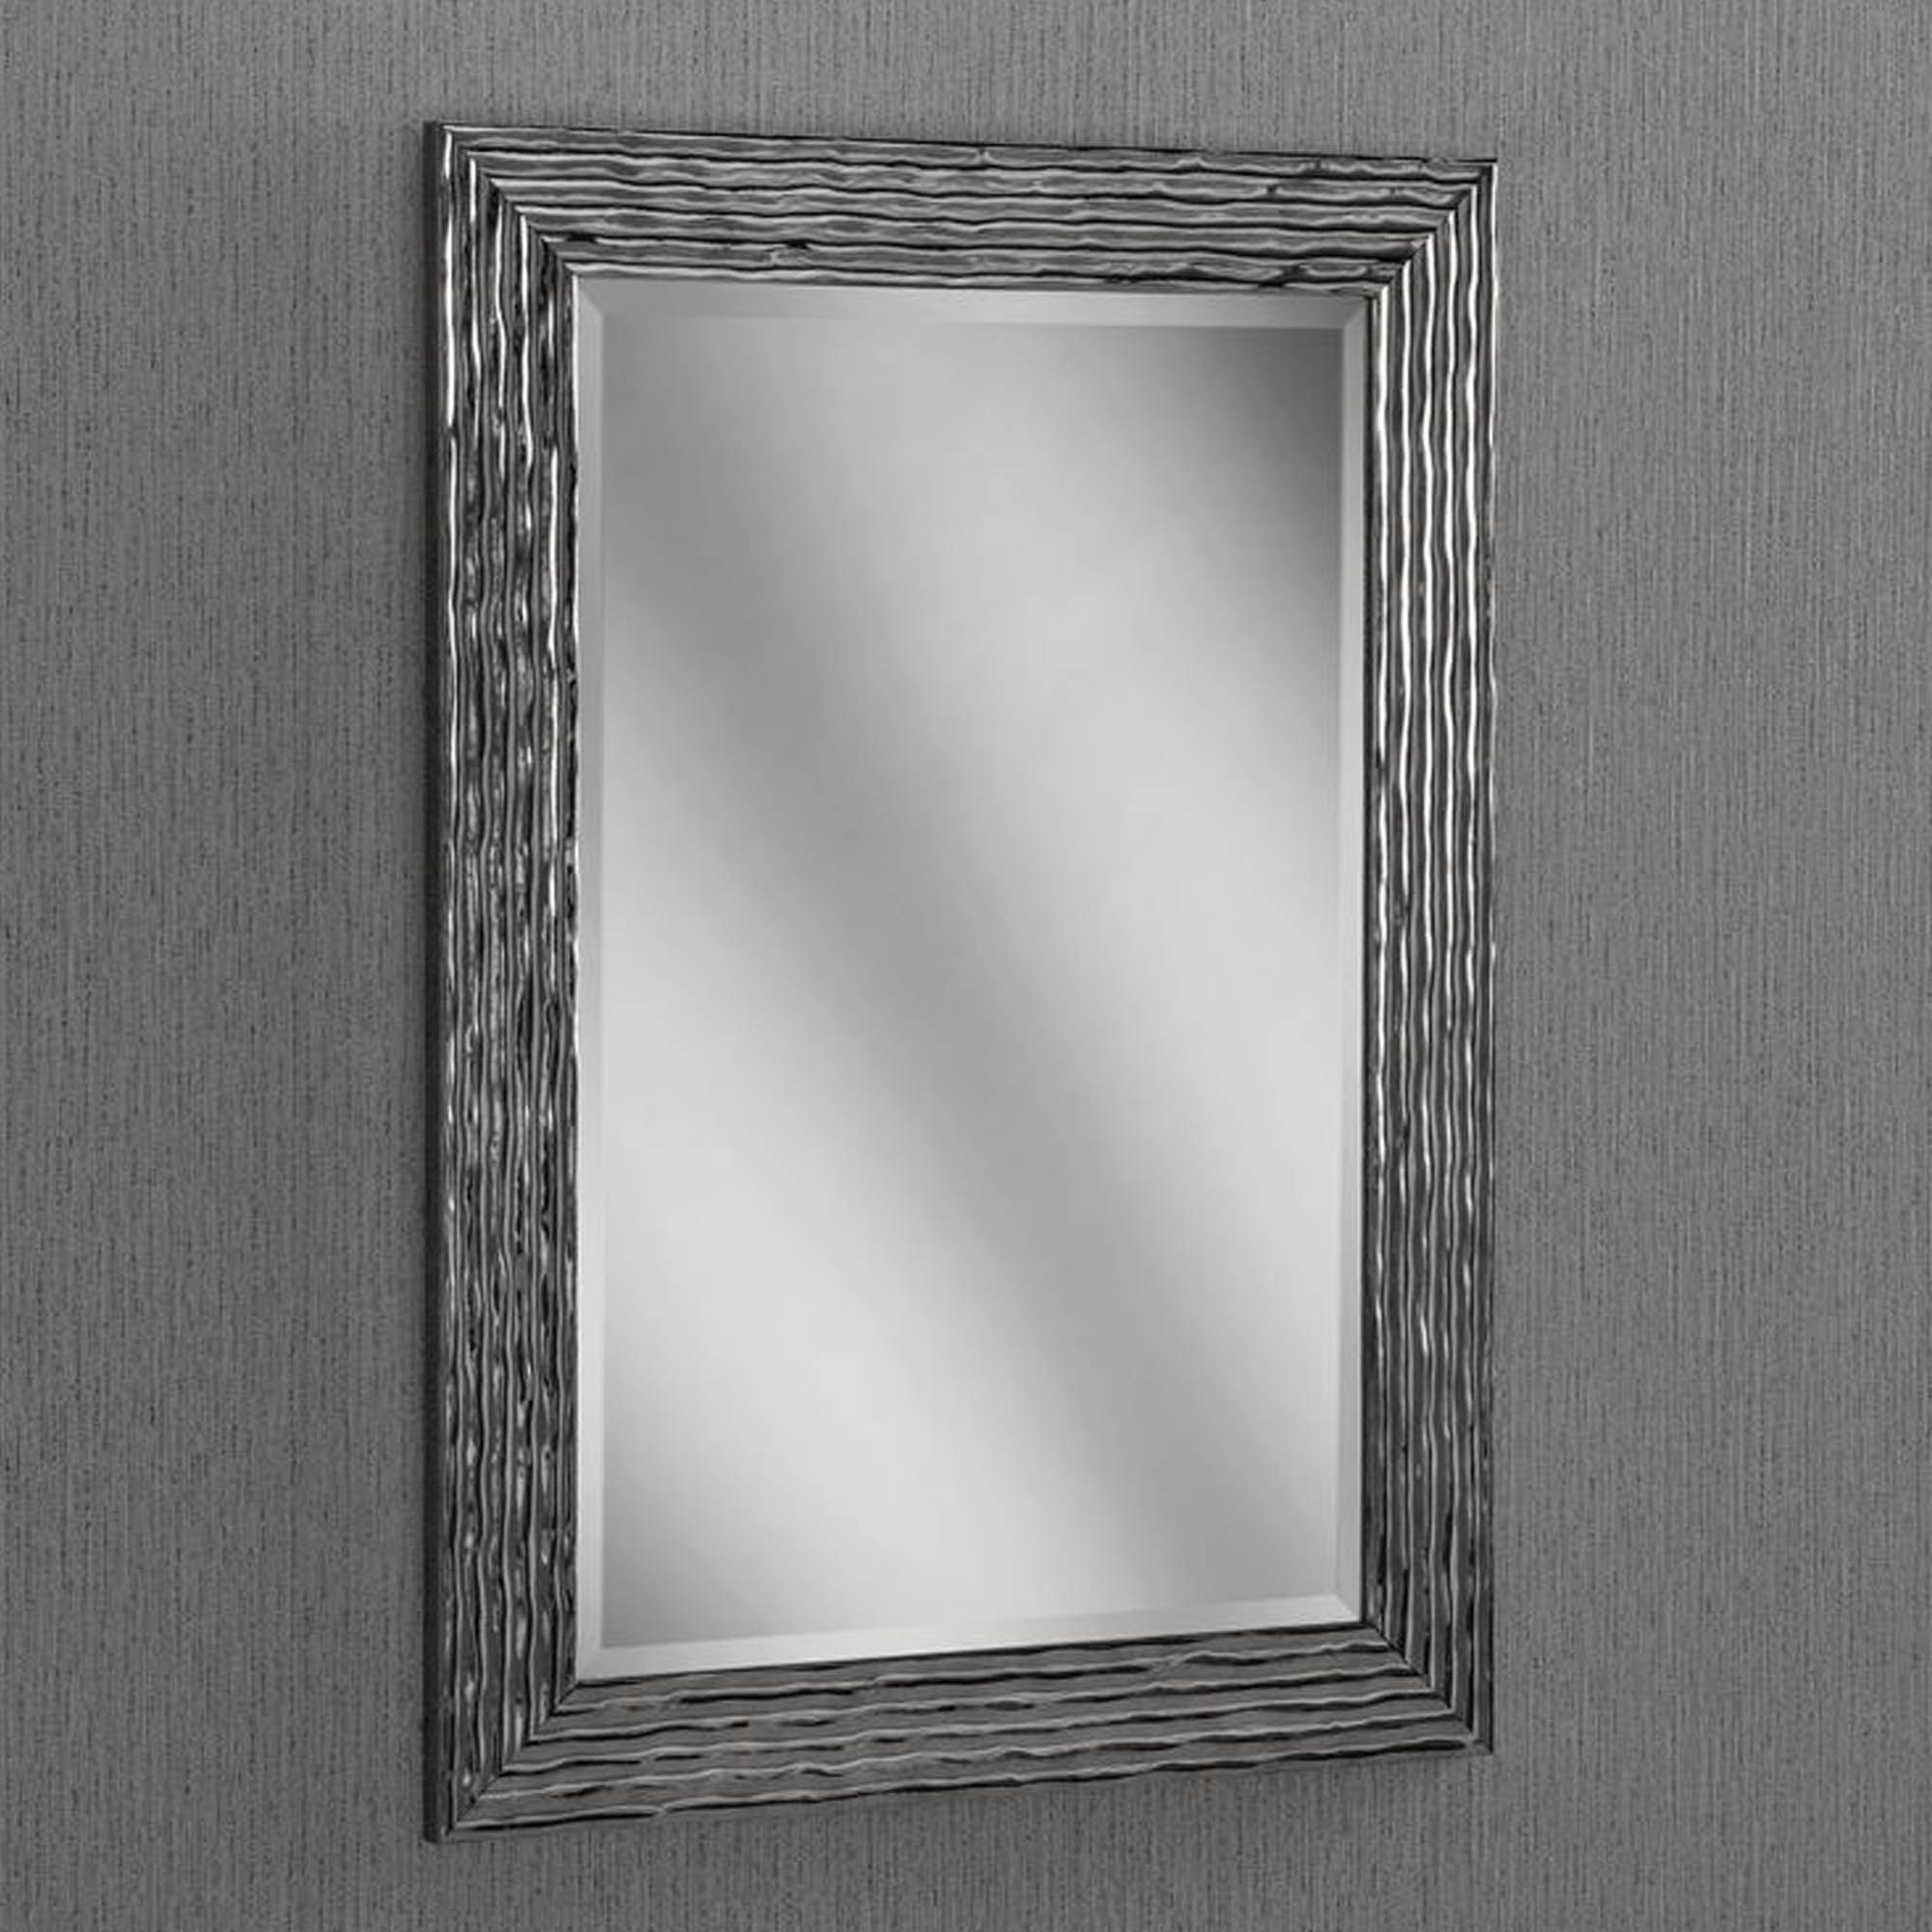 Chrome Grey Textured Wall Mirror | Decor | Homesdirect365 For Gray Wall Mirrors (View 8 of 15)